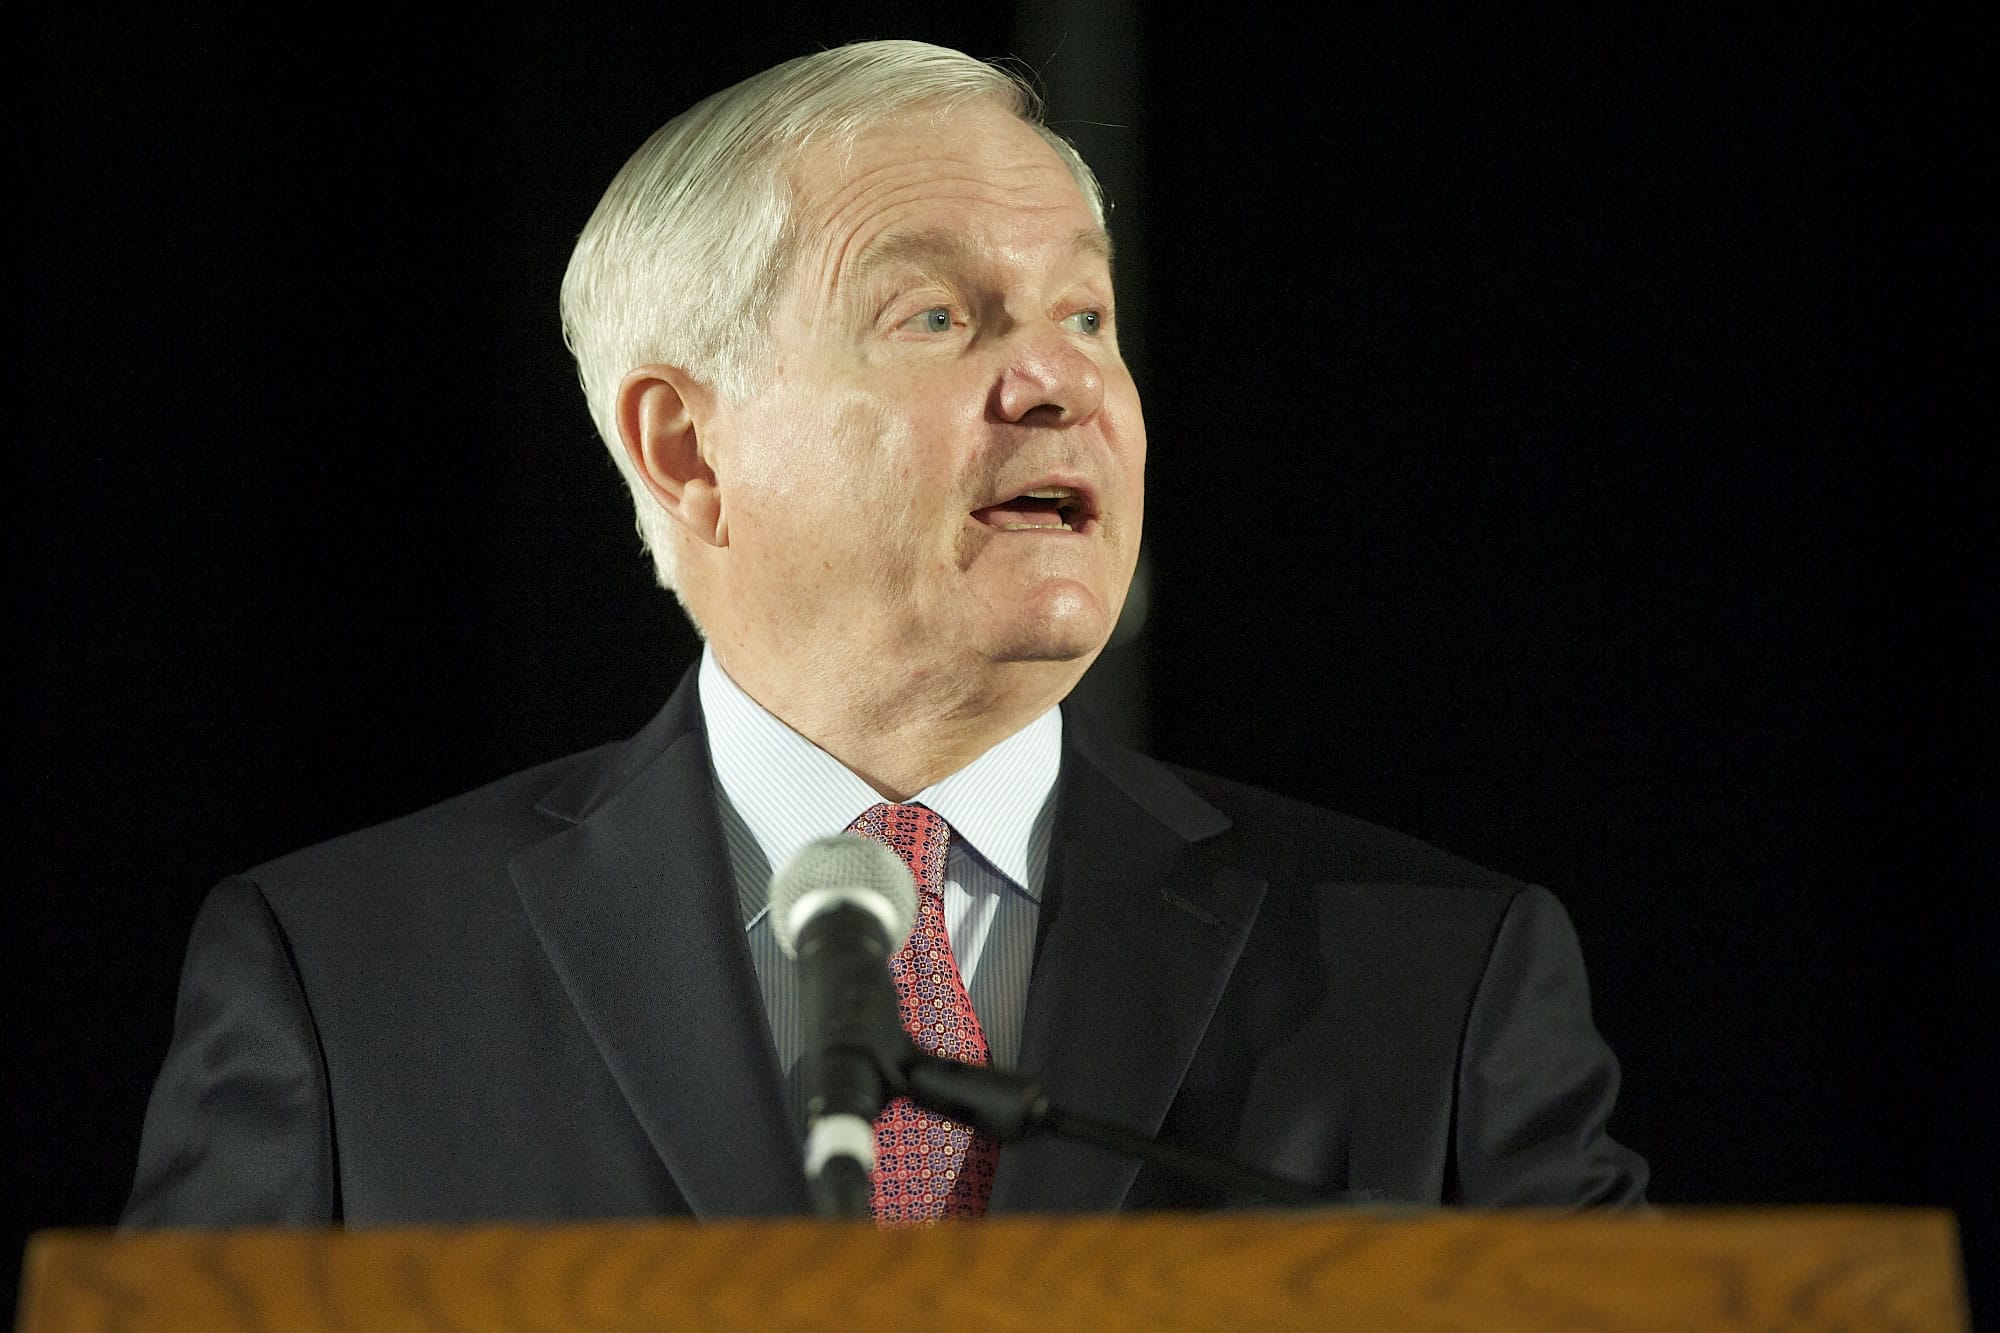 Robert Gates tells local students that there is a place for teamwork, but at some point, &quot;You will be called upon to stand alone and do what's right.&quot;